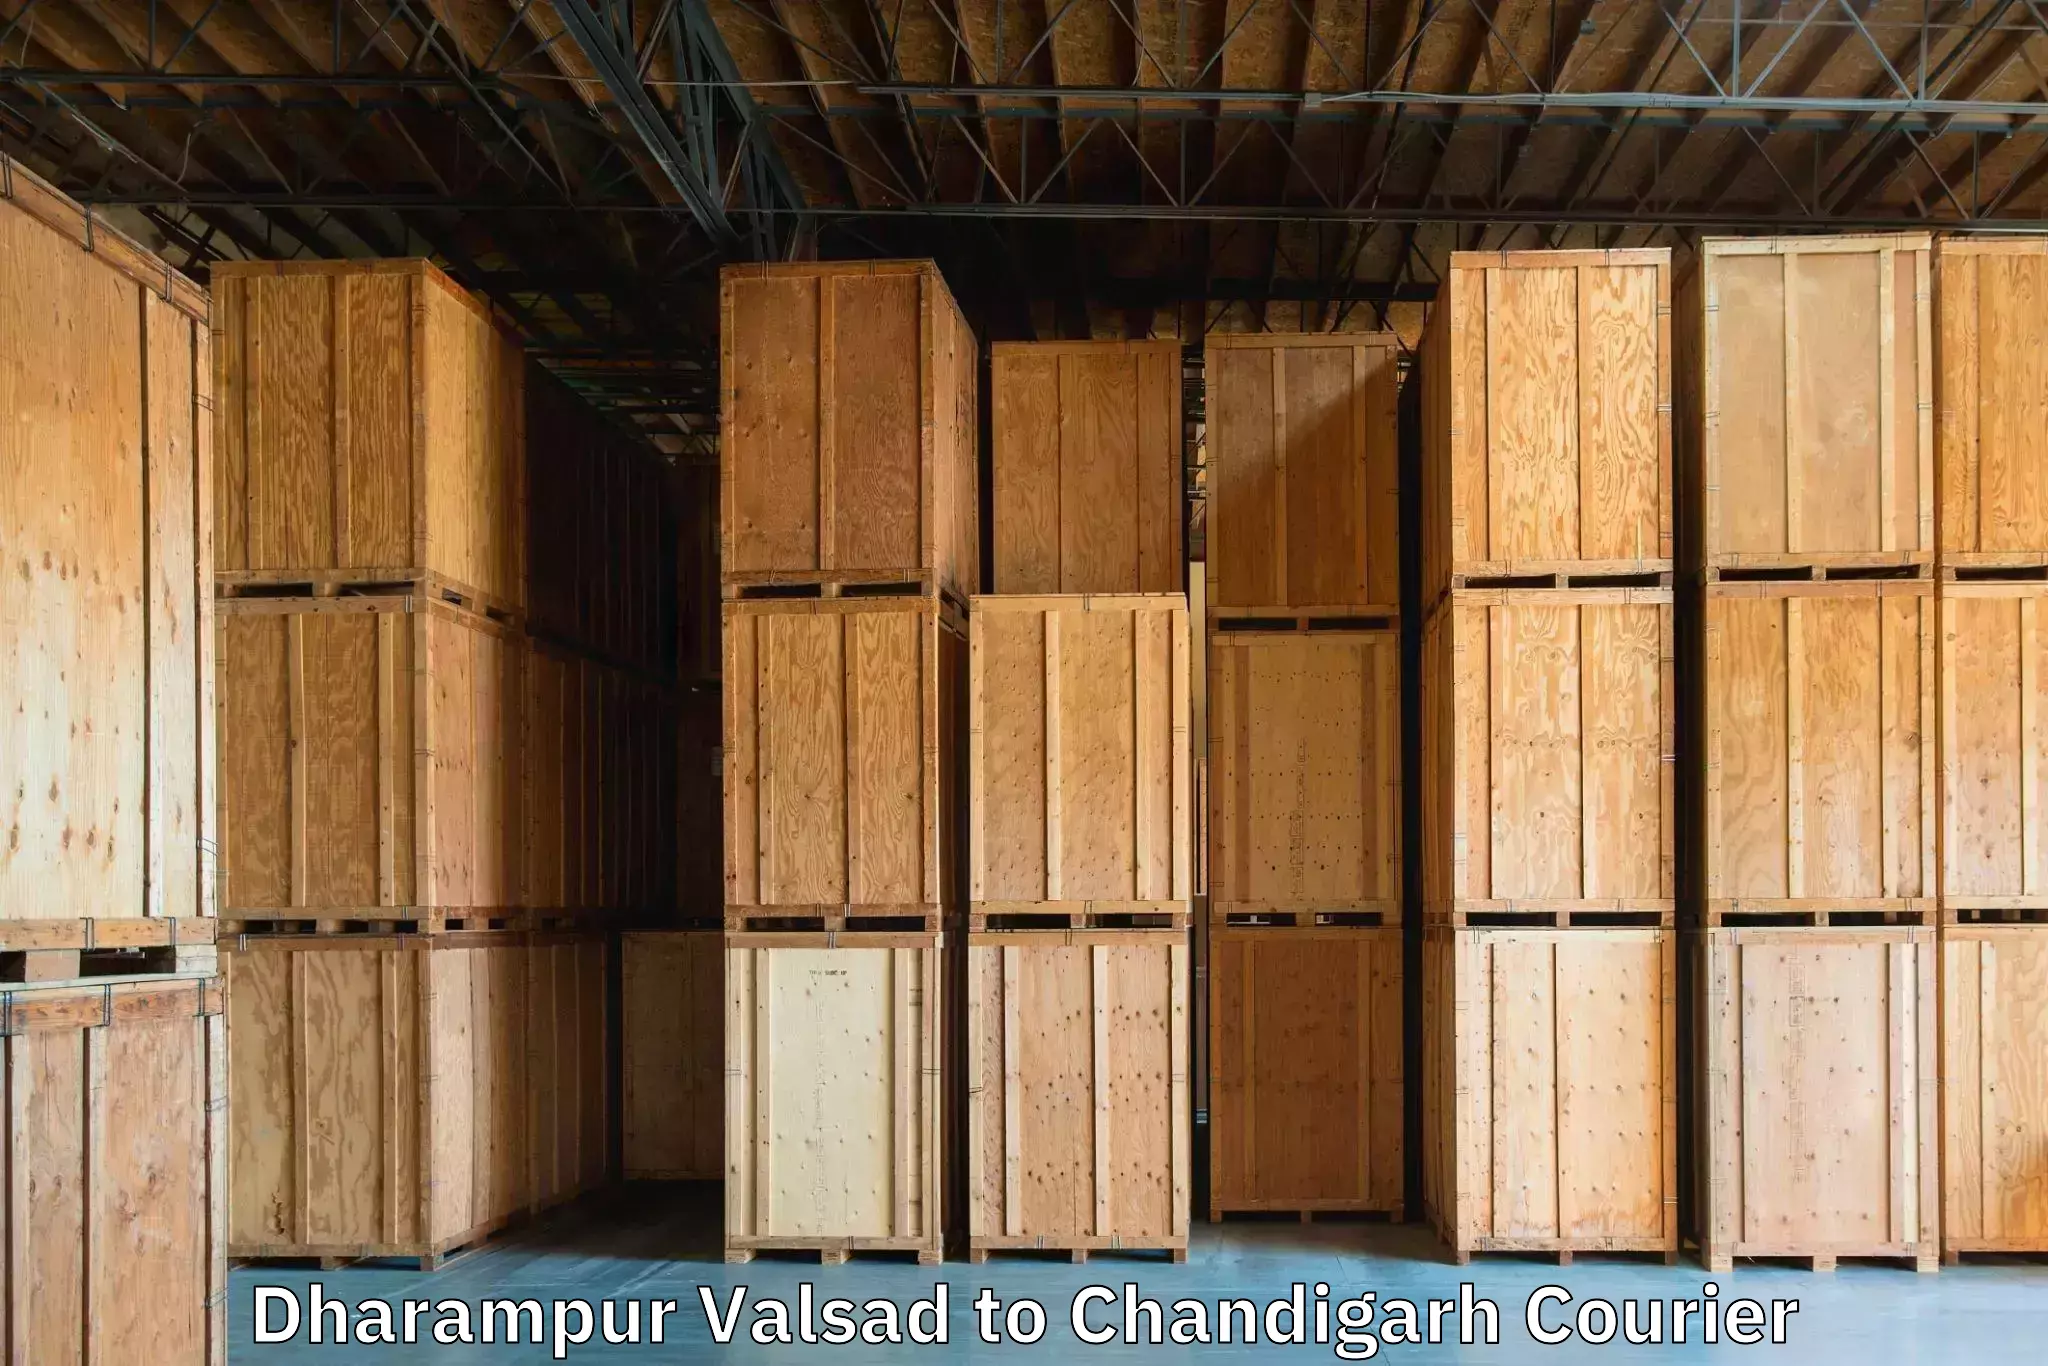 Luggage shipping specialists Dharampur Valsad to Chandigarh